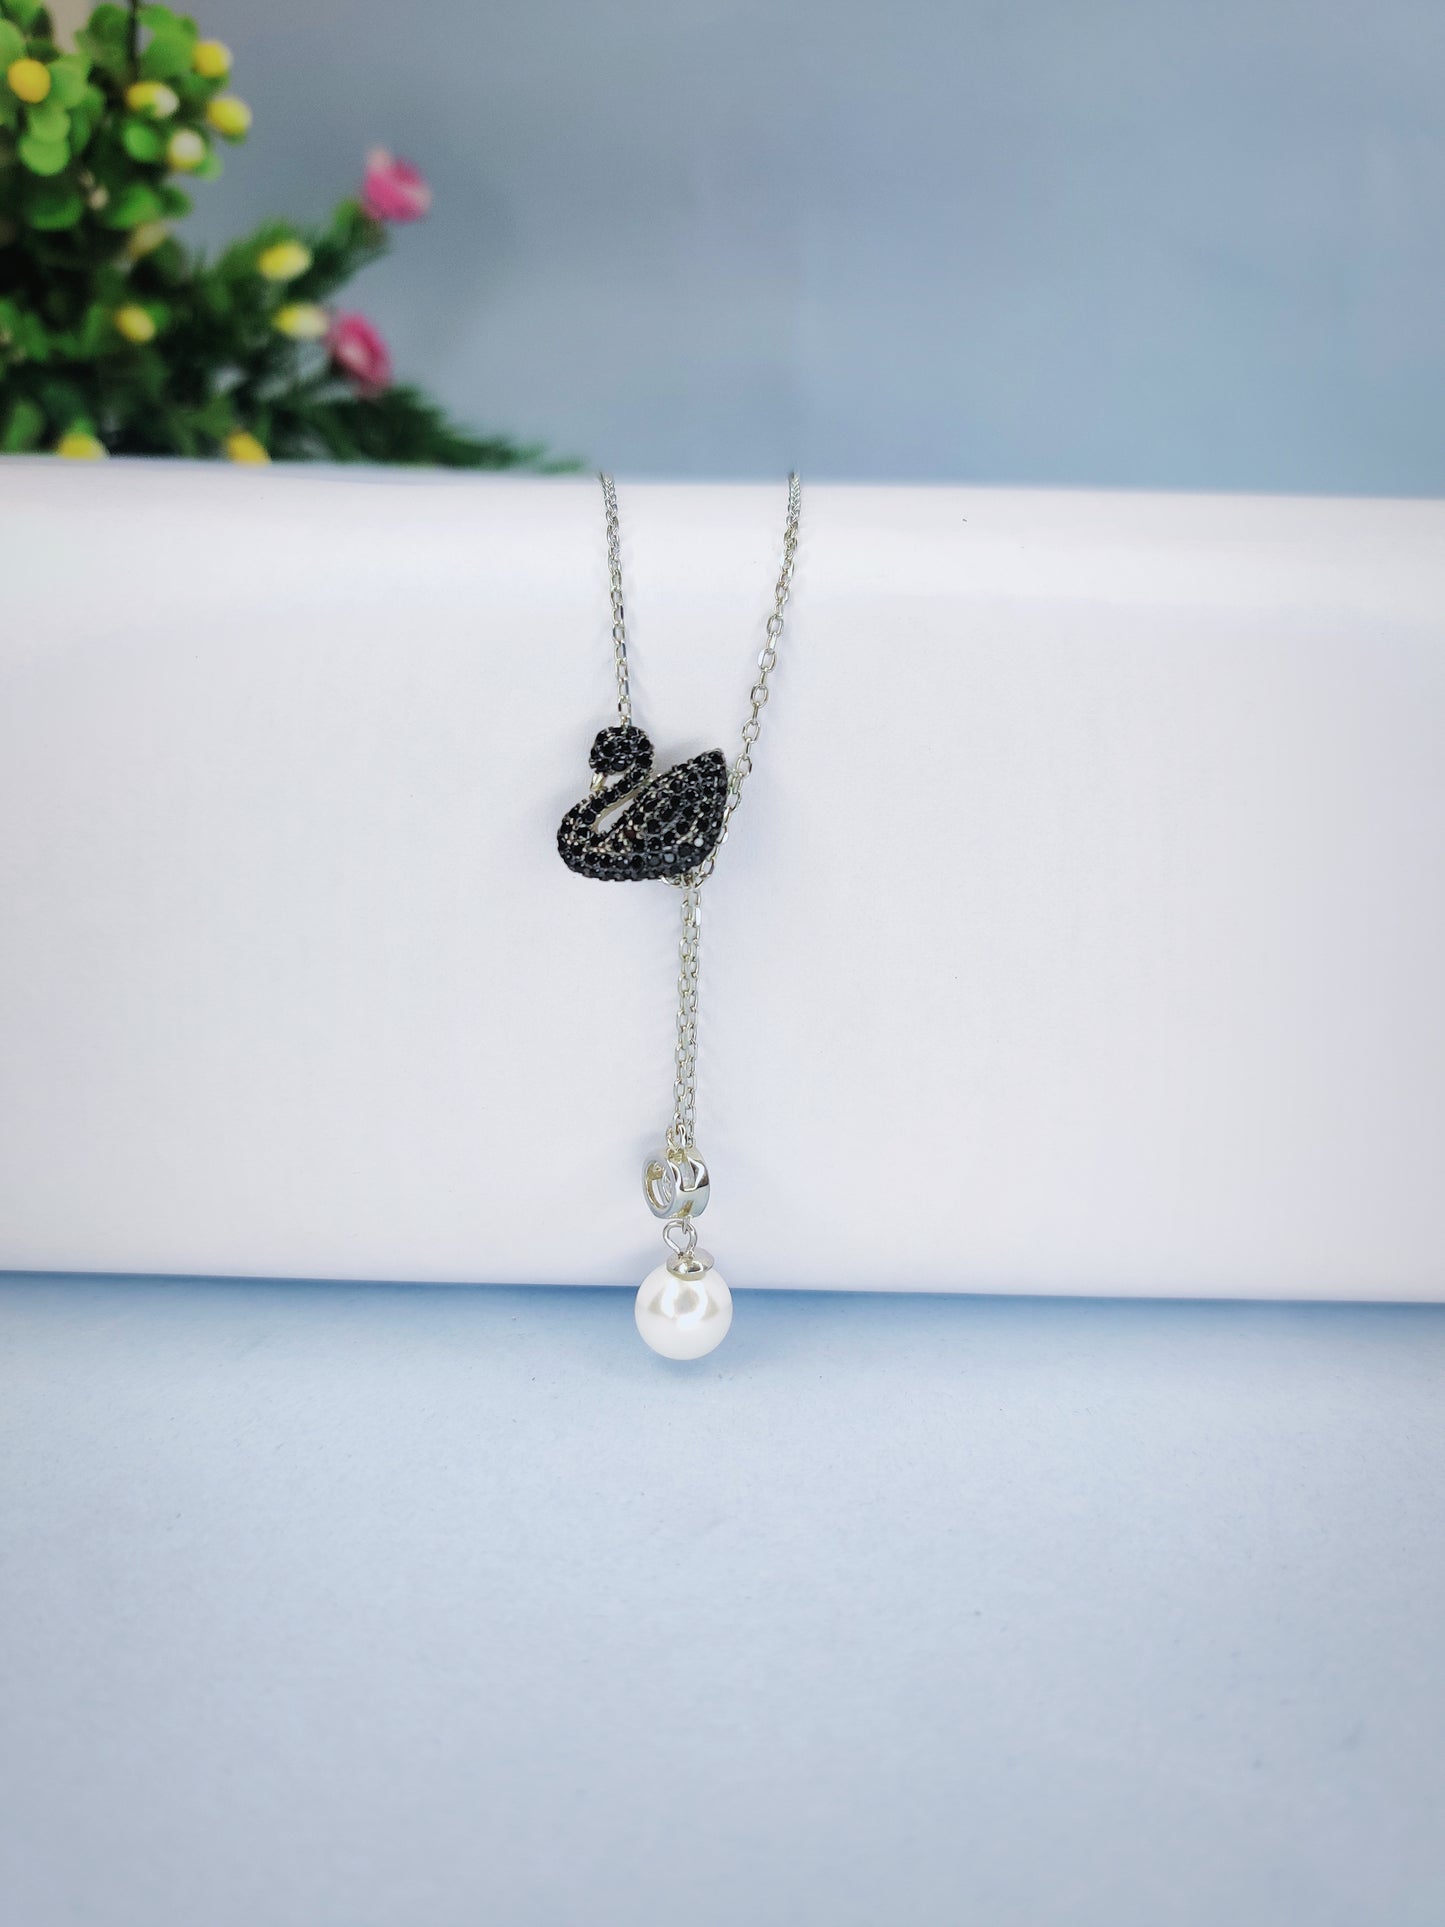 Iconic Black Swan design Necklace With South Sea pearls and Diamond 925  Sterling  Silver Chain